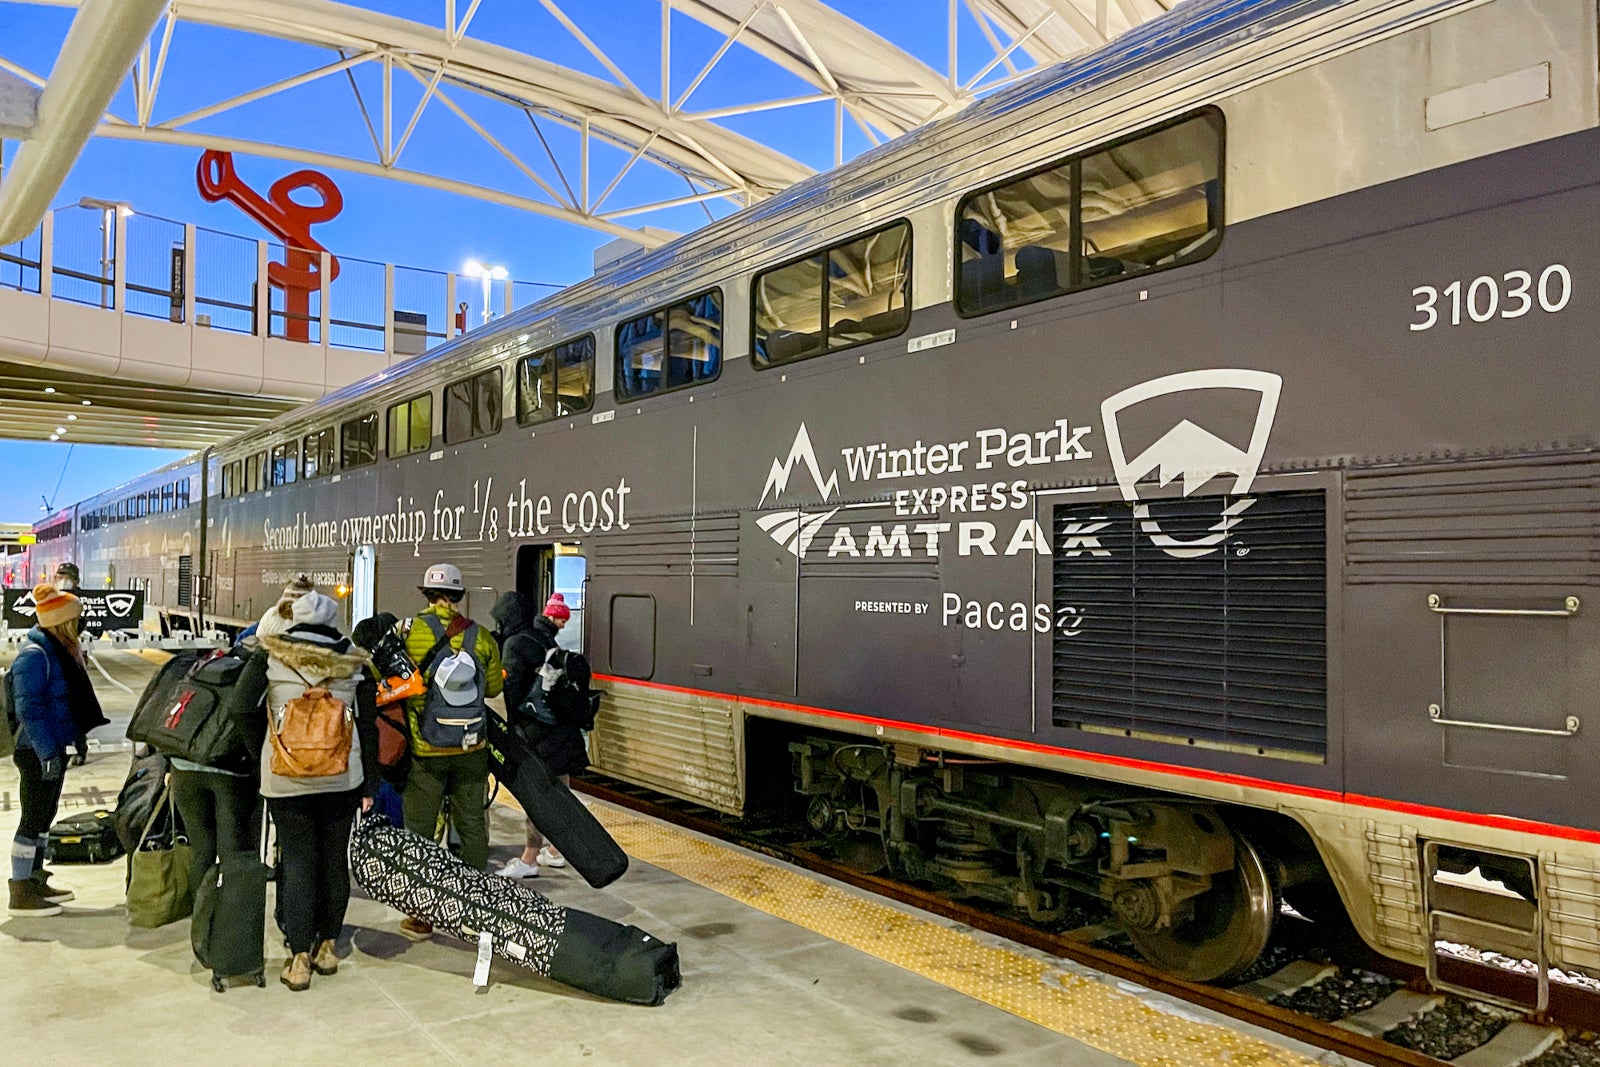 Winter Park Express ski train is back — and tickets start at 34 one